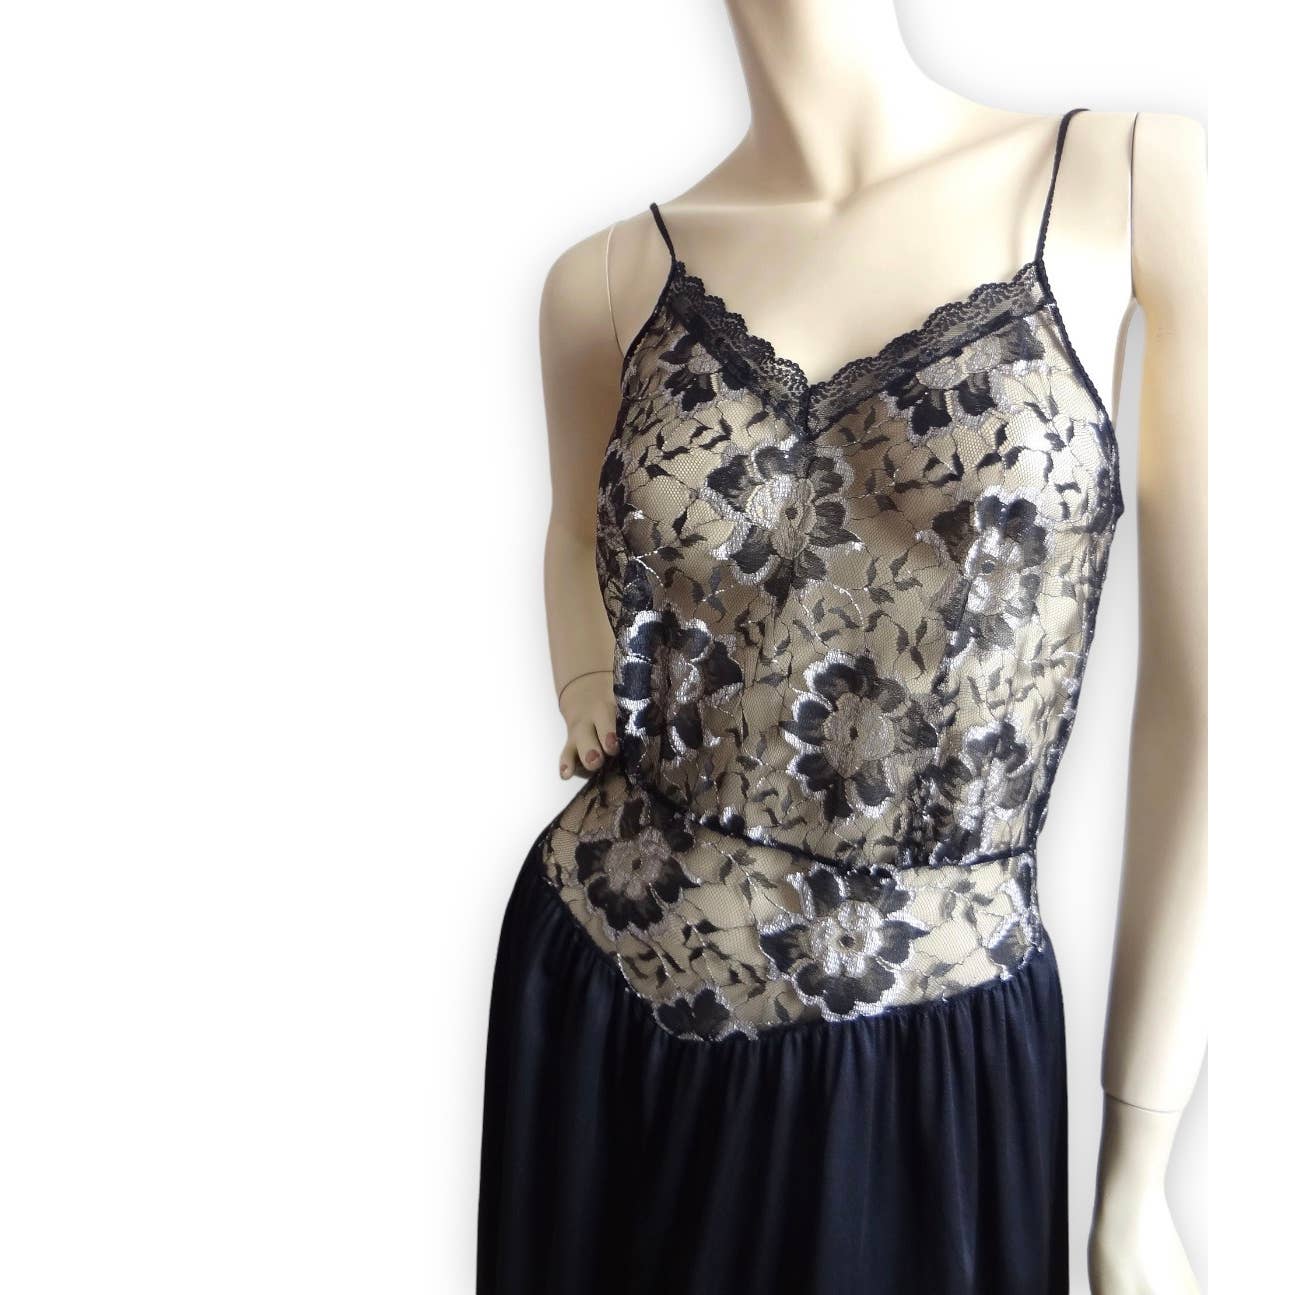 80s Vintage Black Lace Bodice Nightgown S